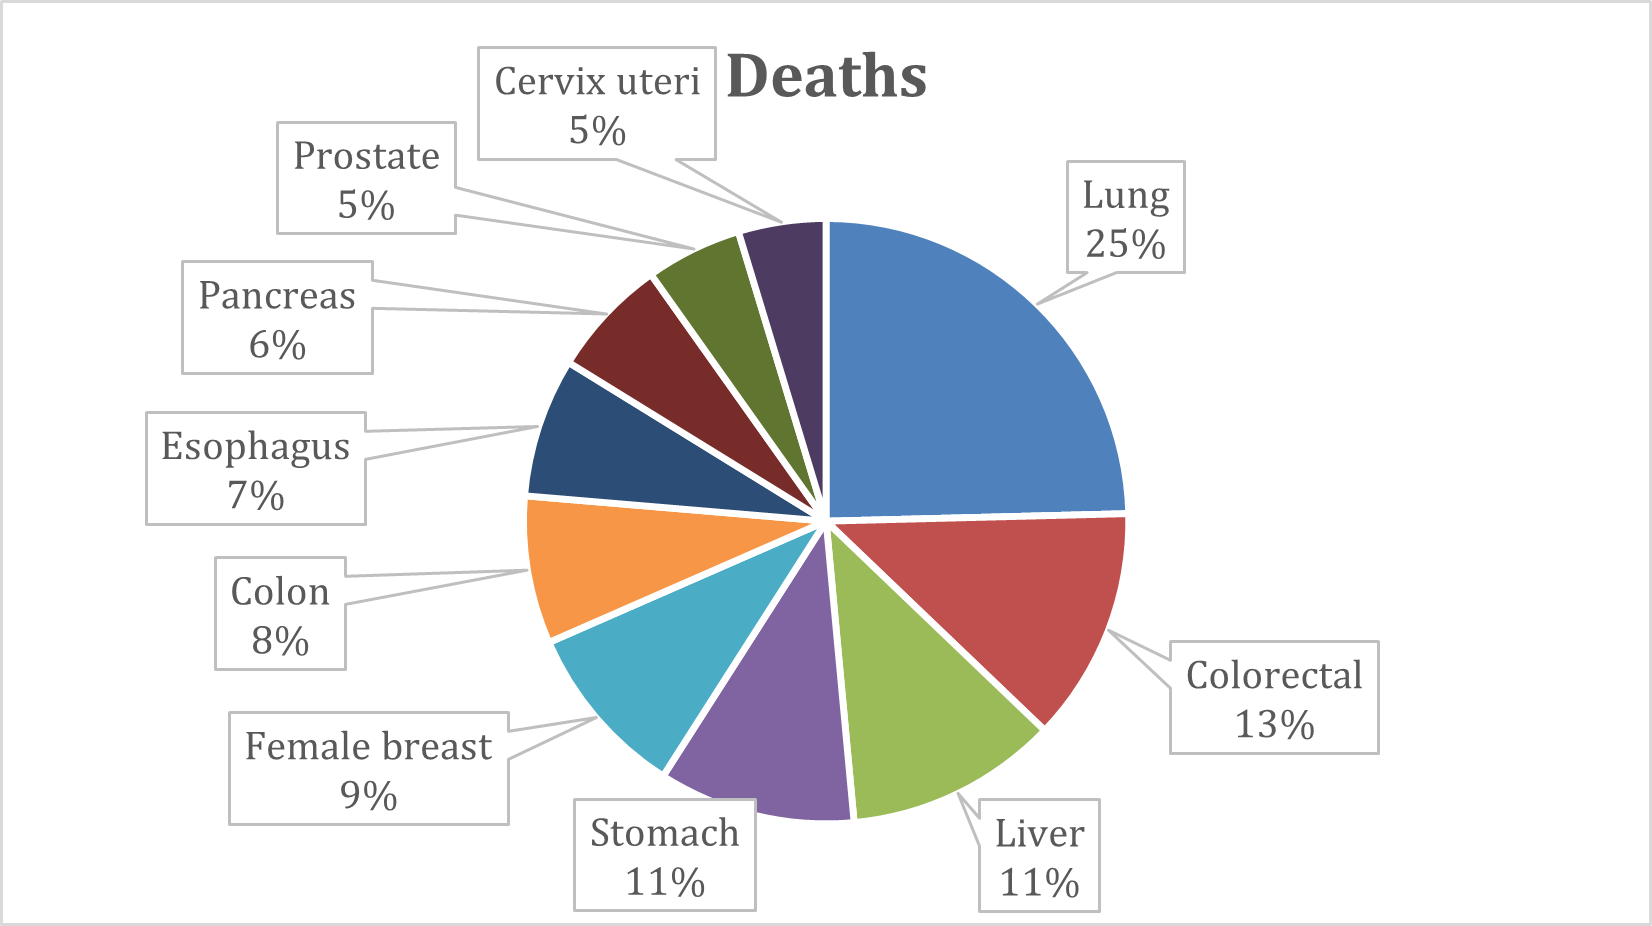 Top 10 Cancer Sites by Deaths